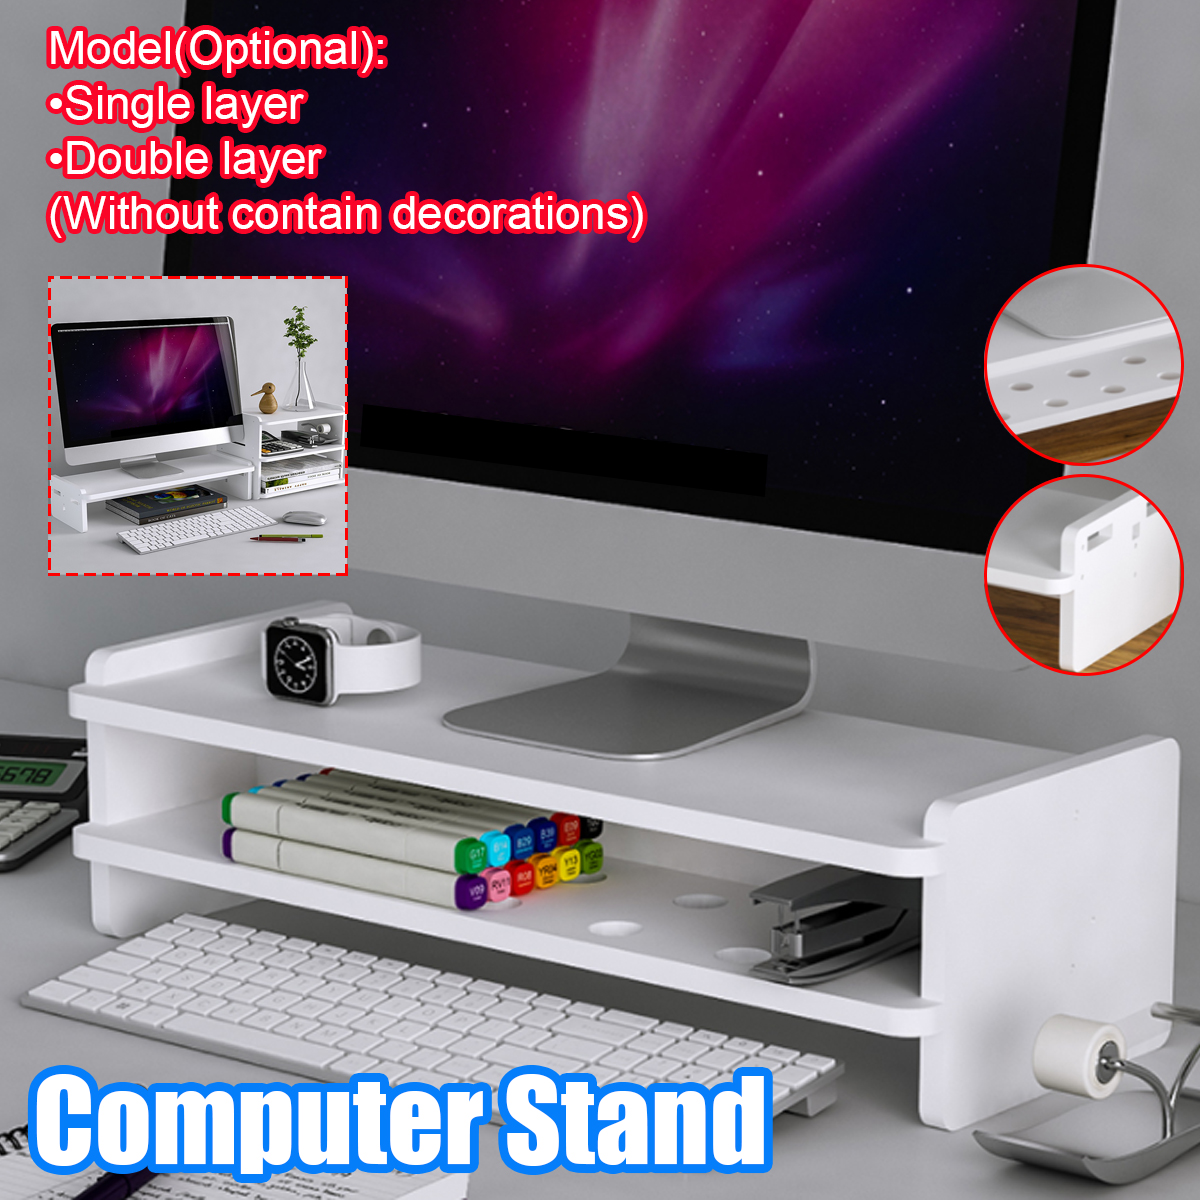 Monitor-Stand-Riser-with-Storage-Organizer-Desktop-Stand-for-Laptop-Computer-Desk-Stand-with-Phone-H-1909309-1